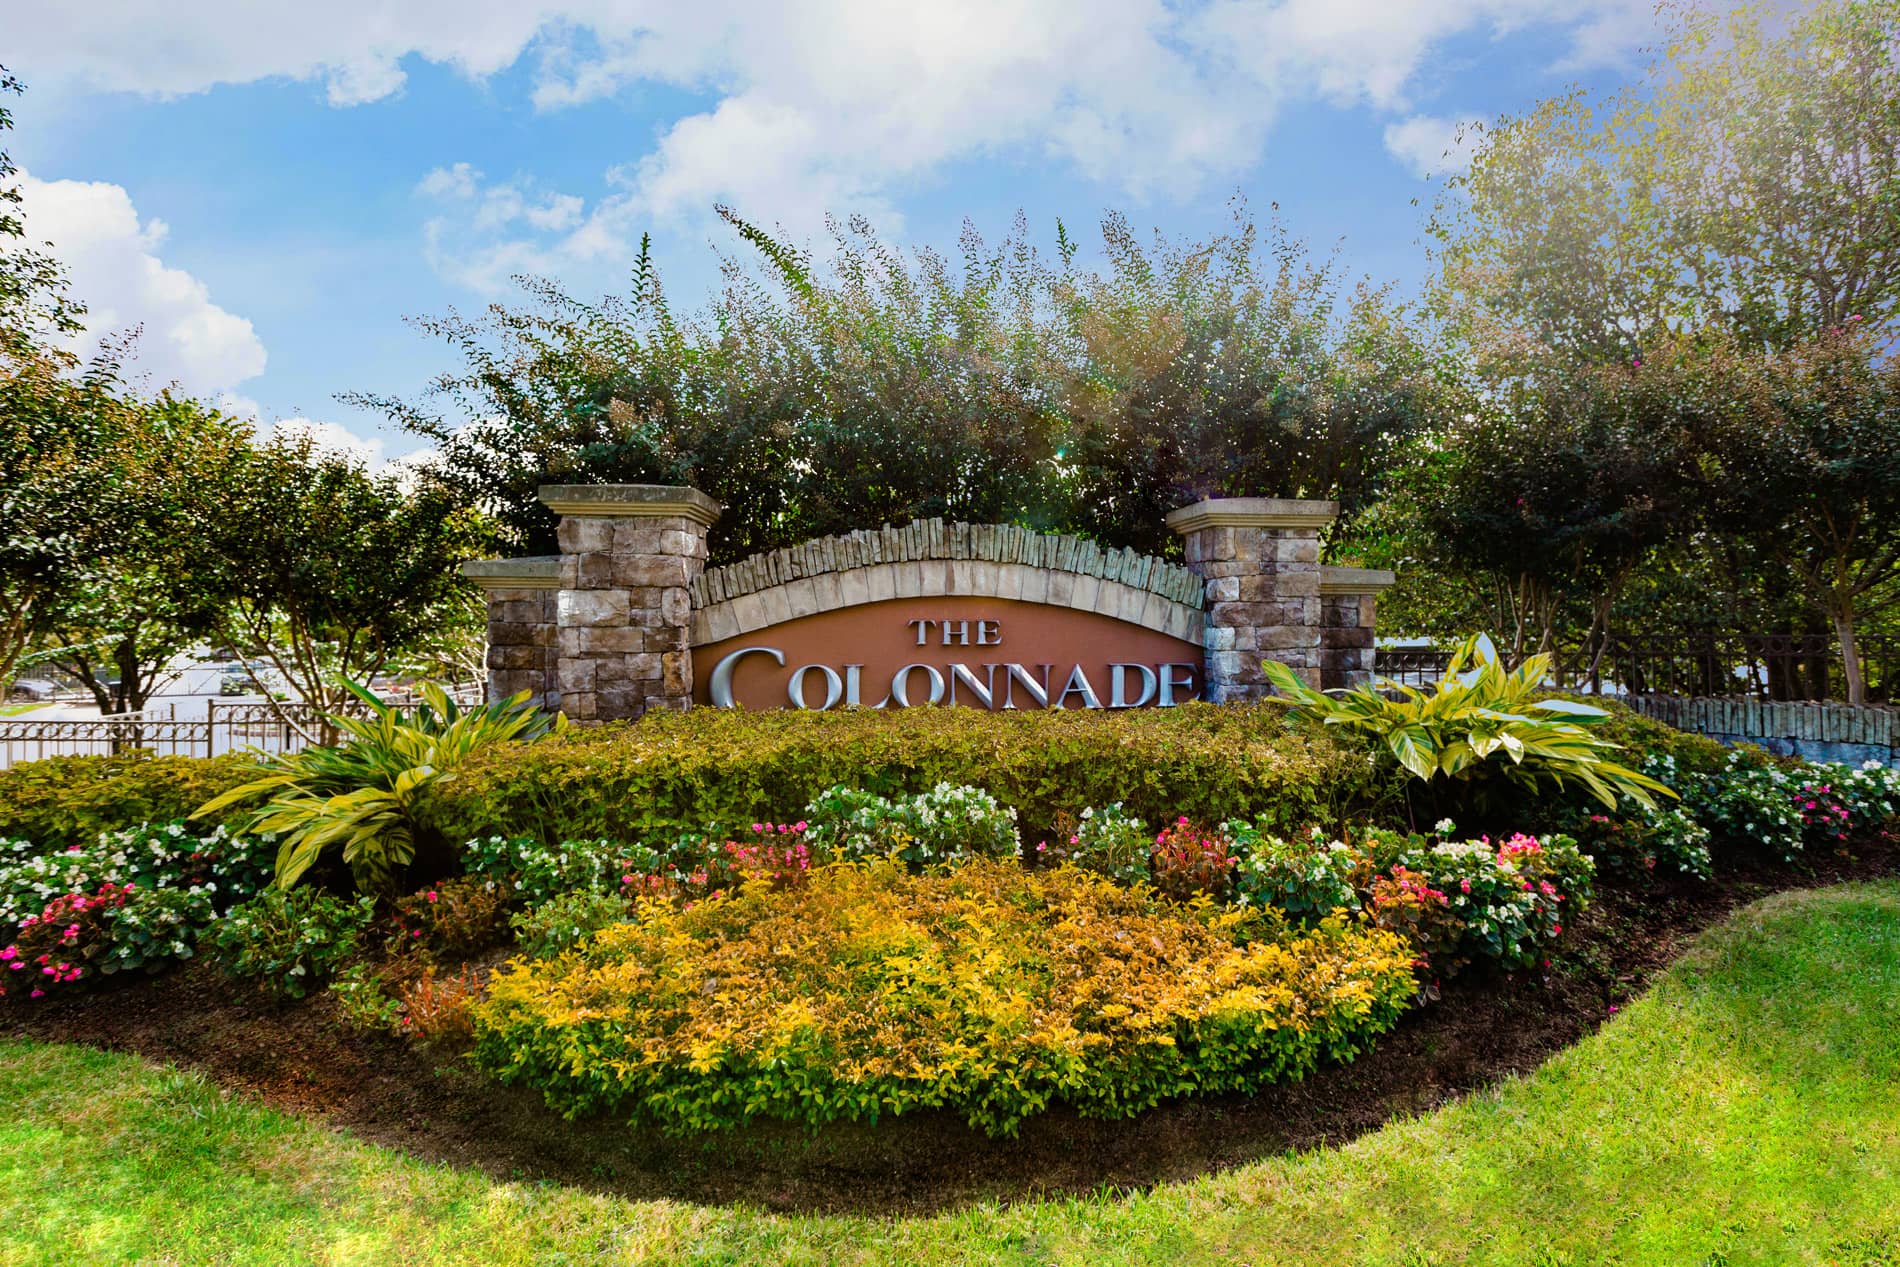 Colonnade Sign